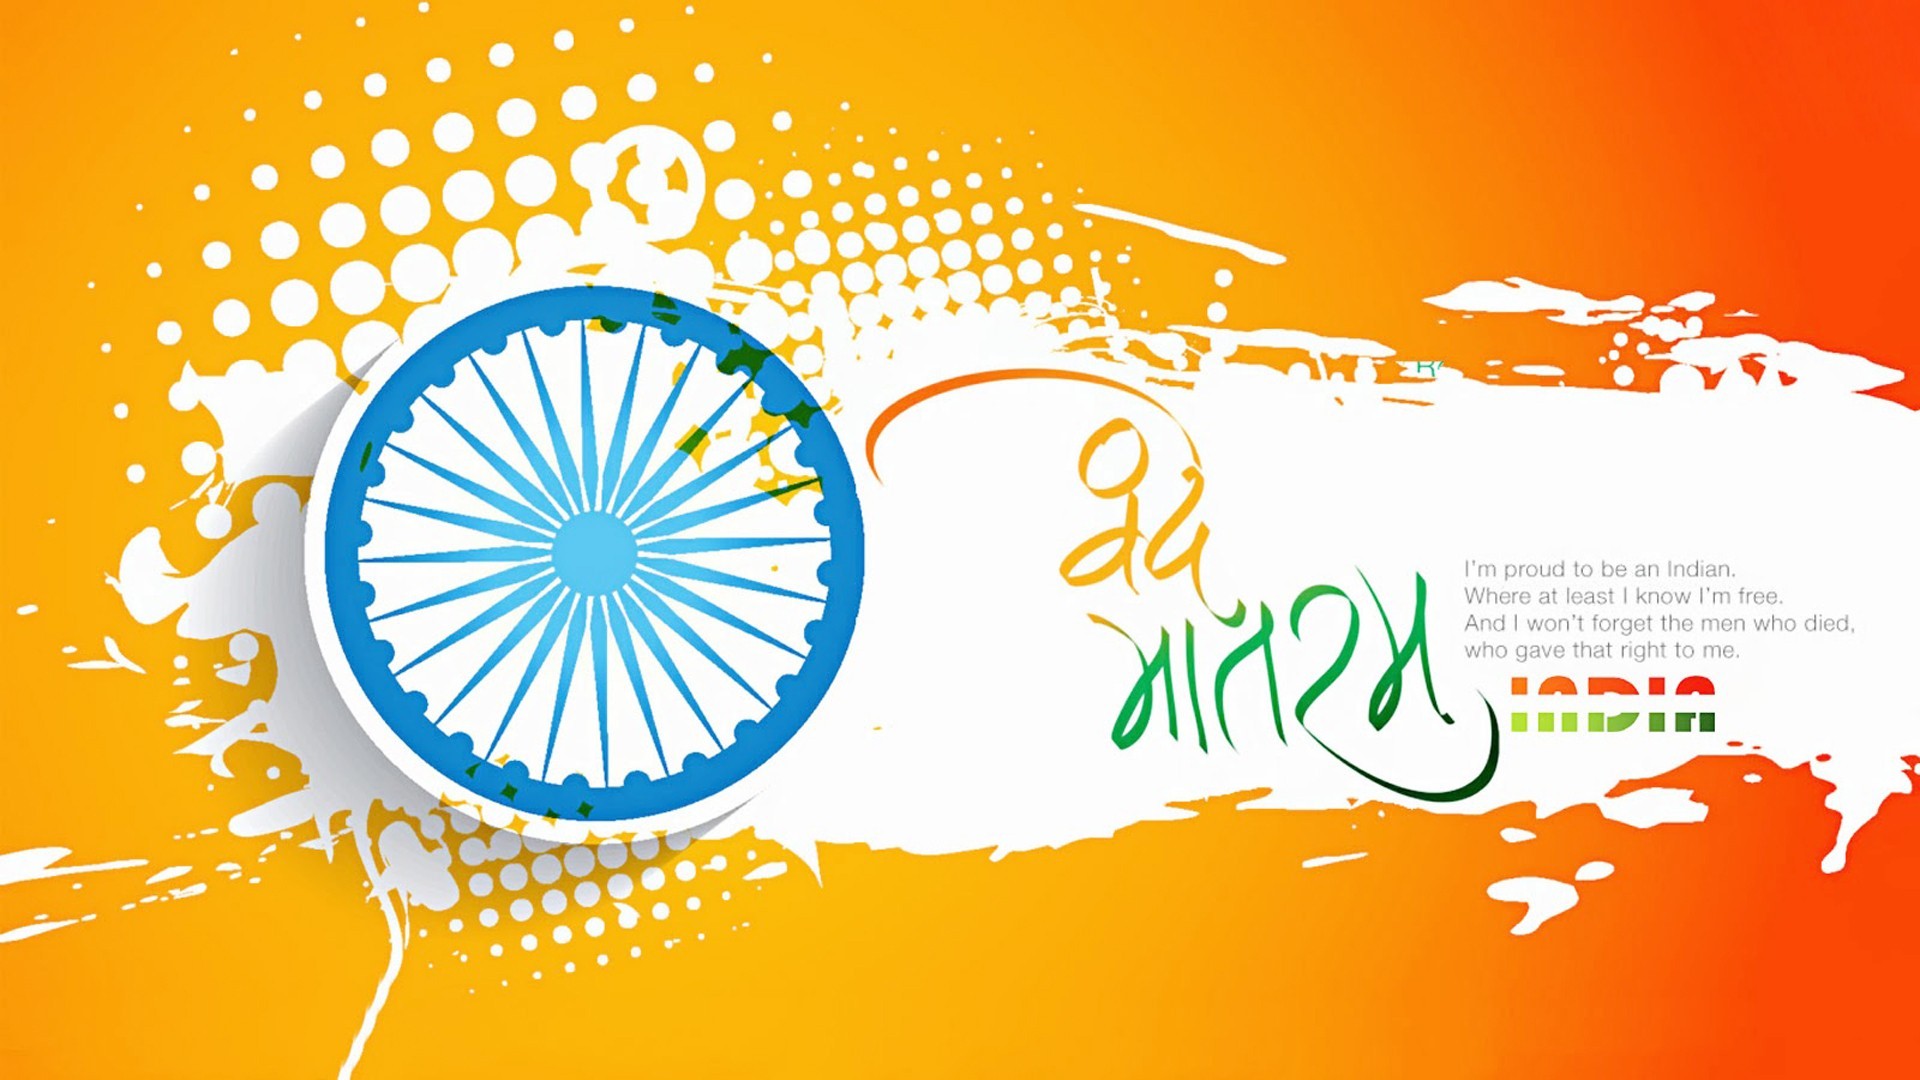 26 Jan India Republic Day HD Wallpapers Images Photos Pics - Free Download